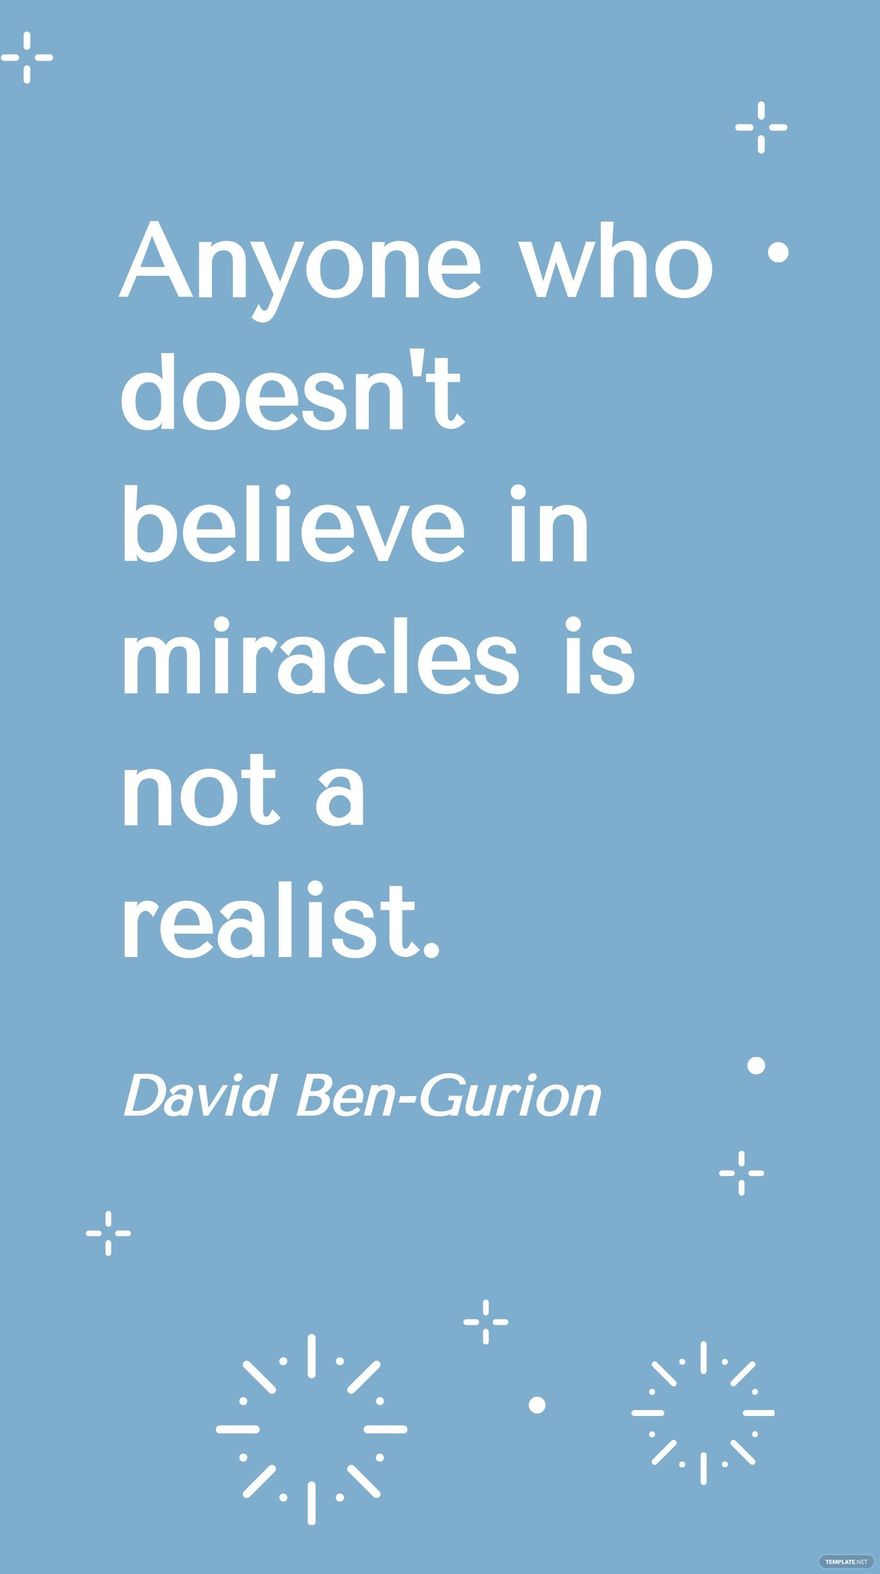 Free David Ben-Gurion - Anyone who doesn't believe in miracles is not a realist. in JPG